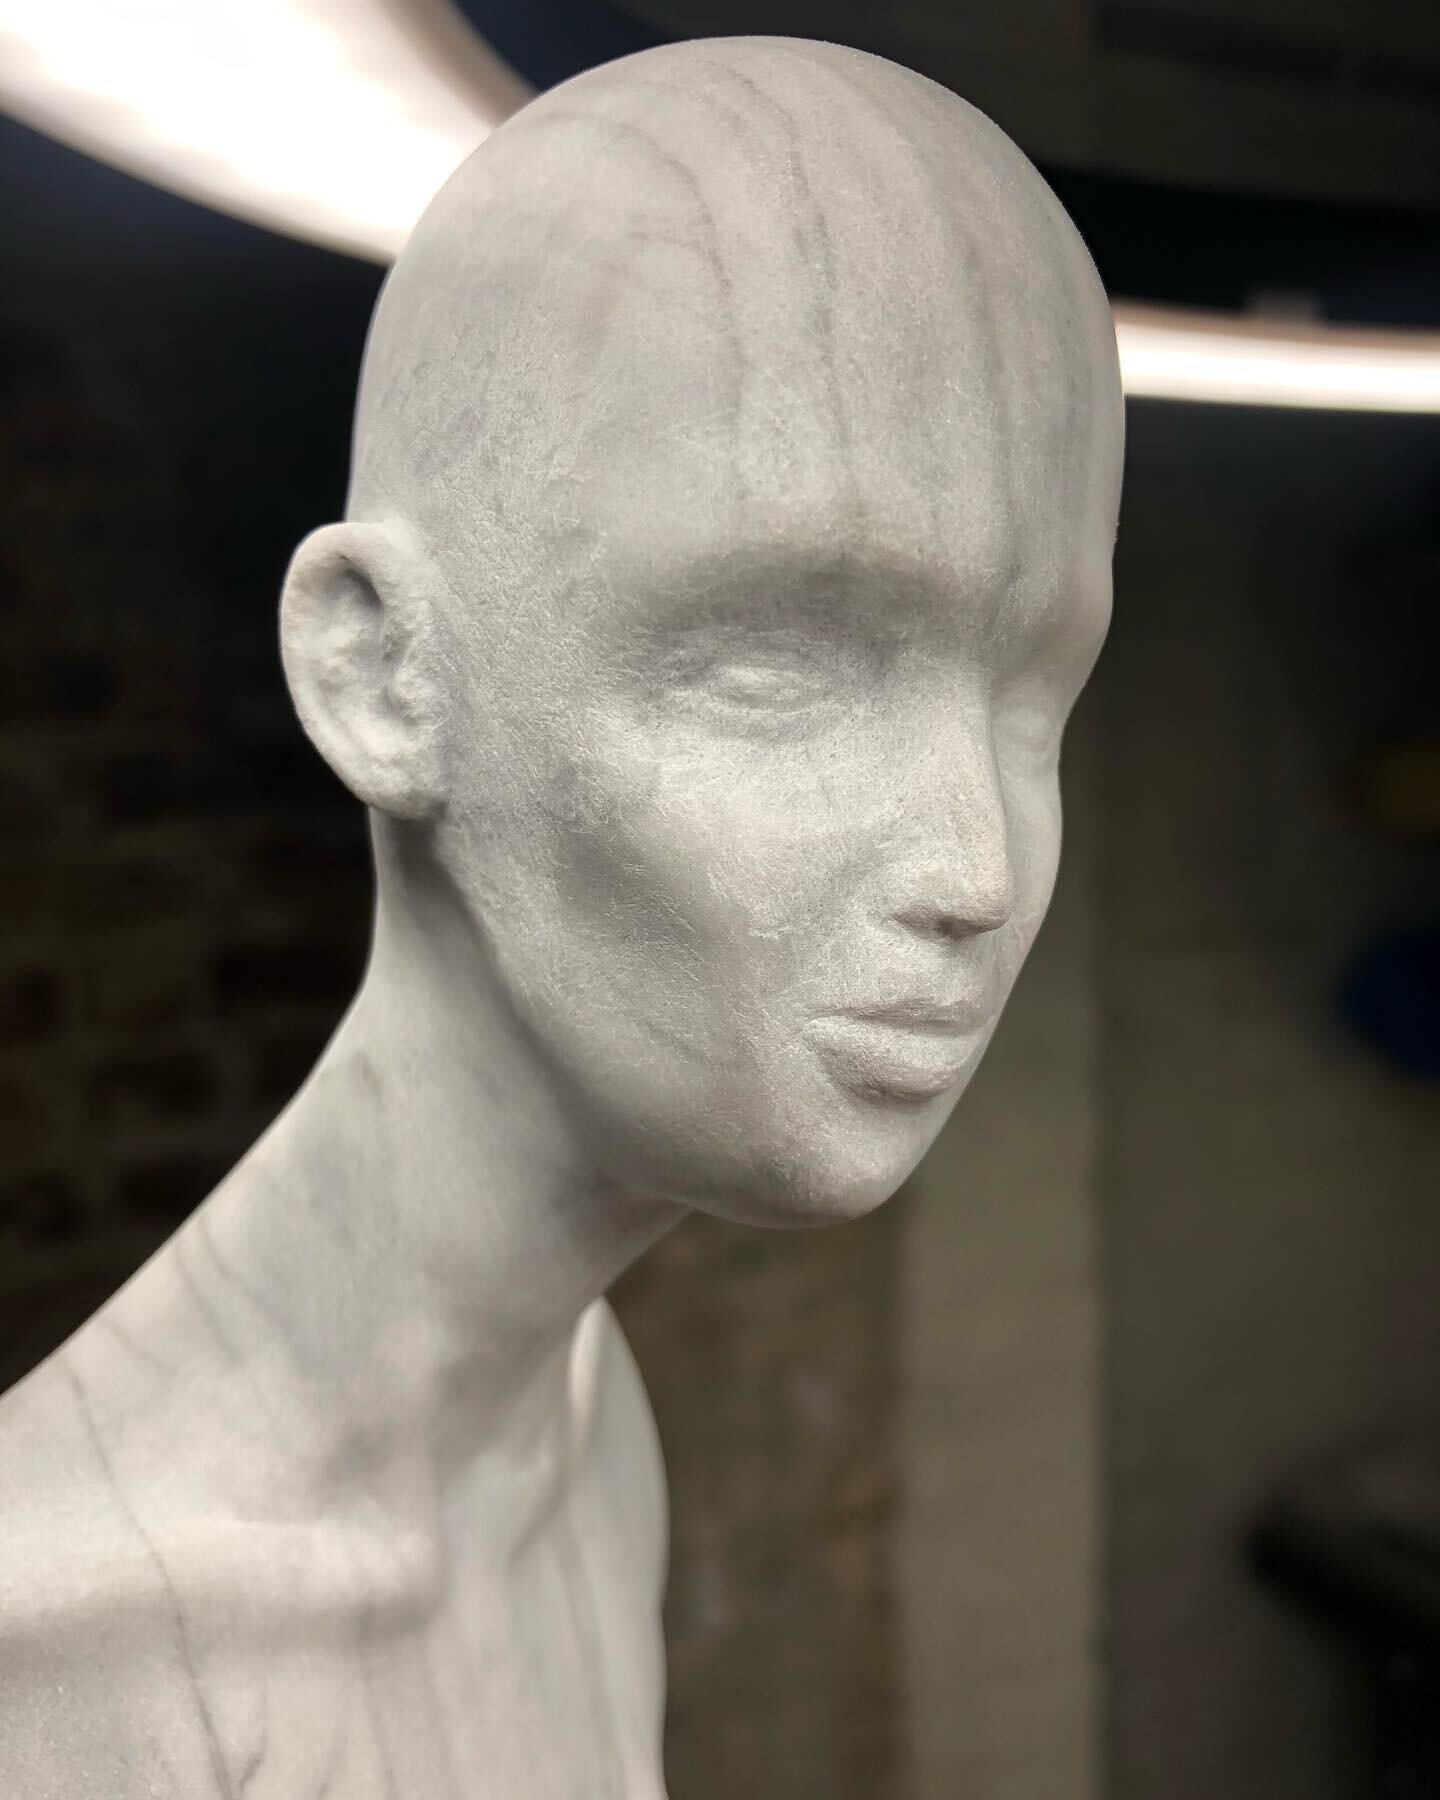 Trying to push myself out of my comfort zone with these smaller details

#sculpture #stonesculpture #marblesculpture #portrait #fineart #newyorkacademyofart #closeup #newyorkartists #bushwickartist #carraramarble #abcstone 
@abcstone @newyorkacademyo